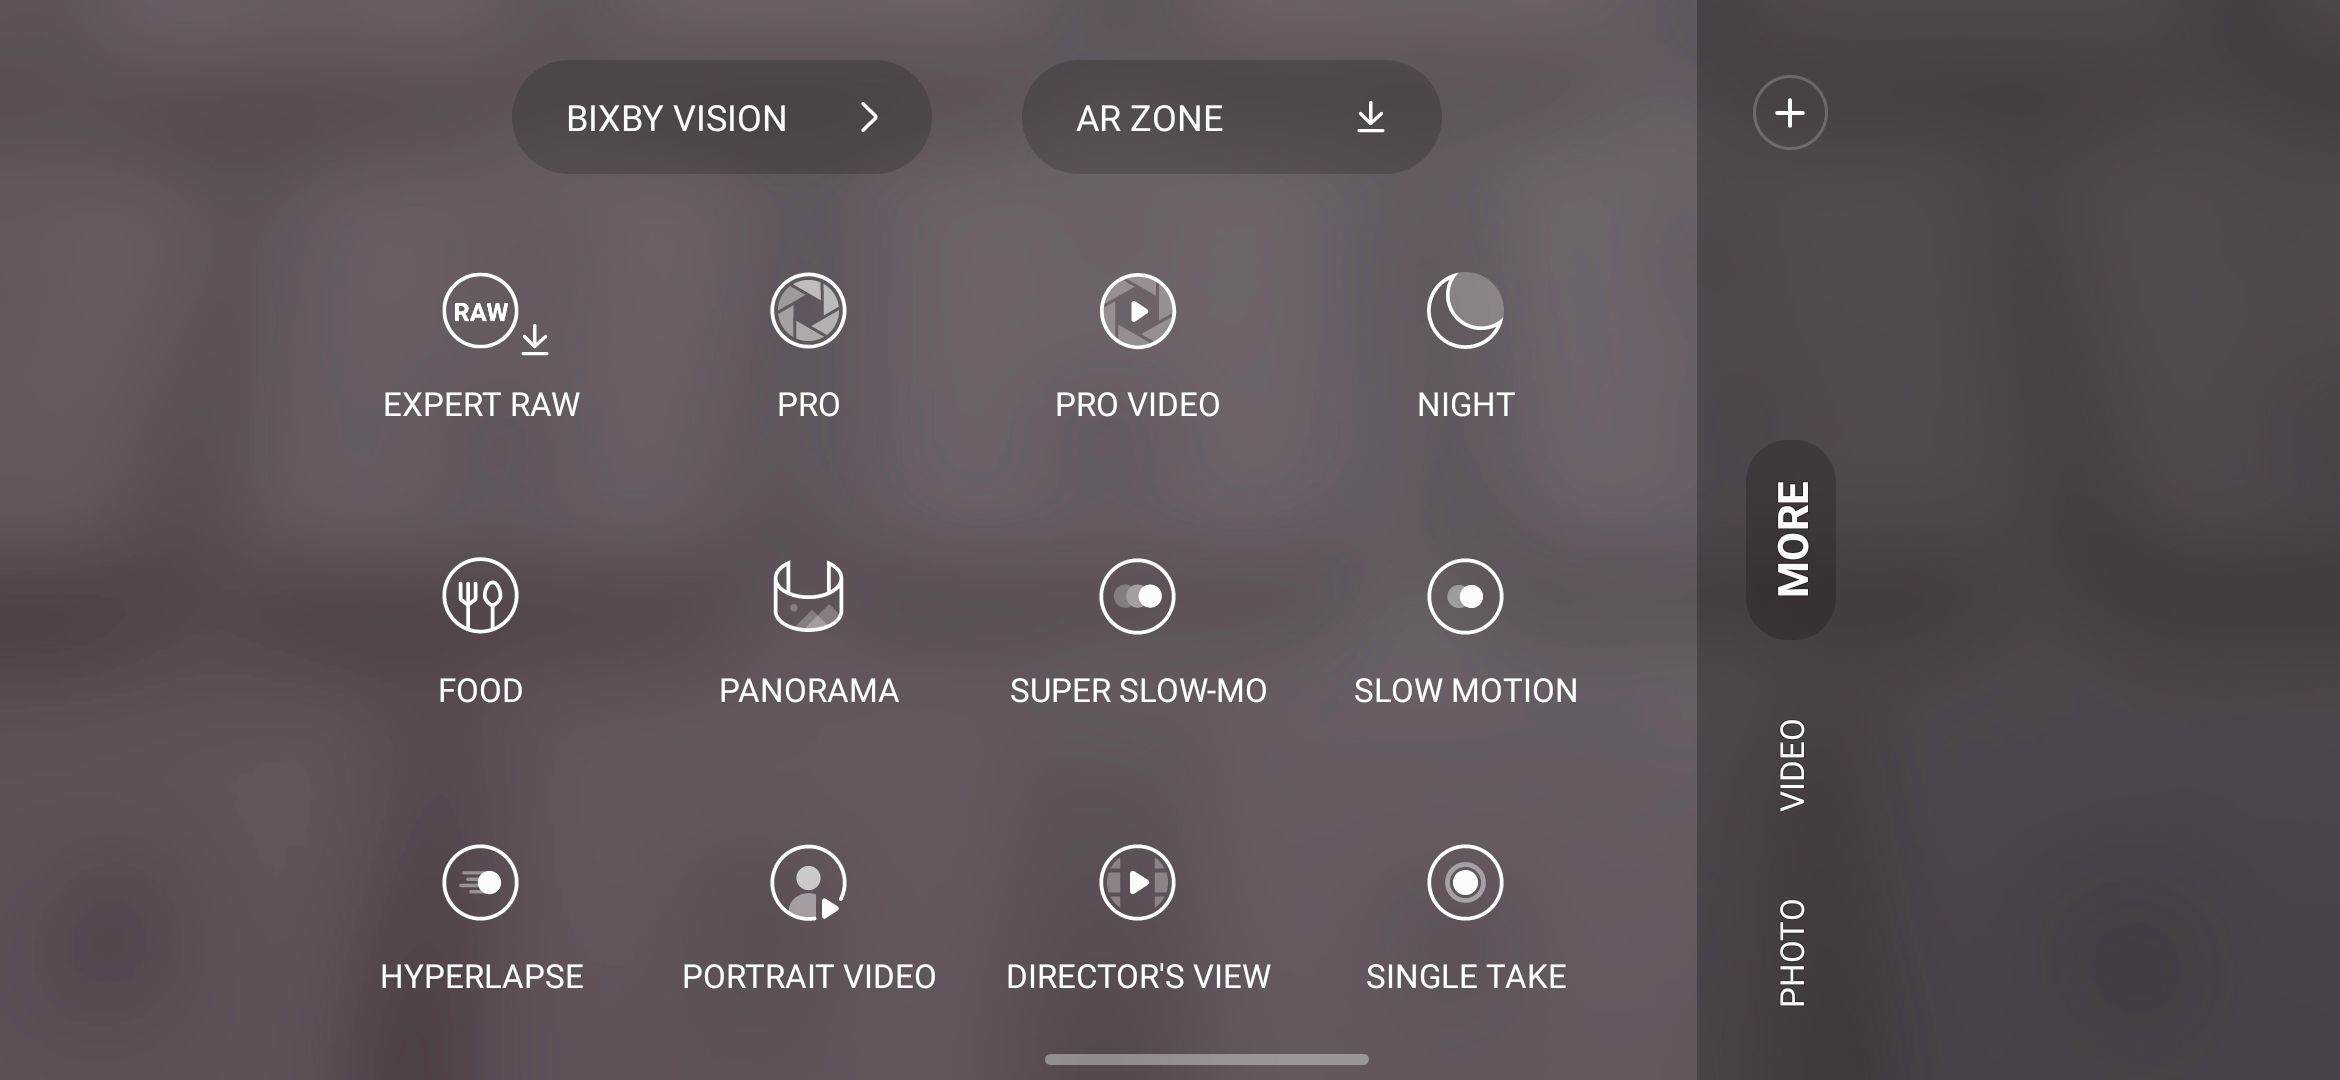 A screenshot of the Samsung camera app, showing a shortcut to Expert RAW.